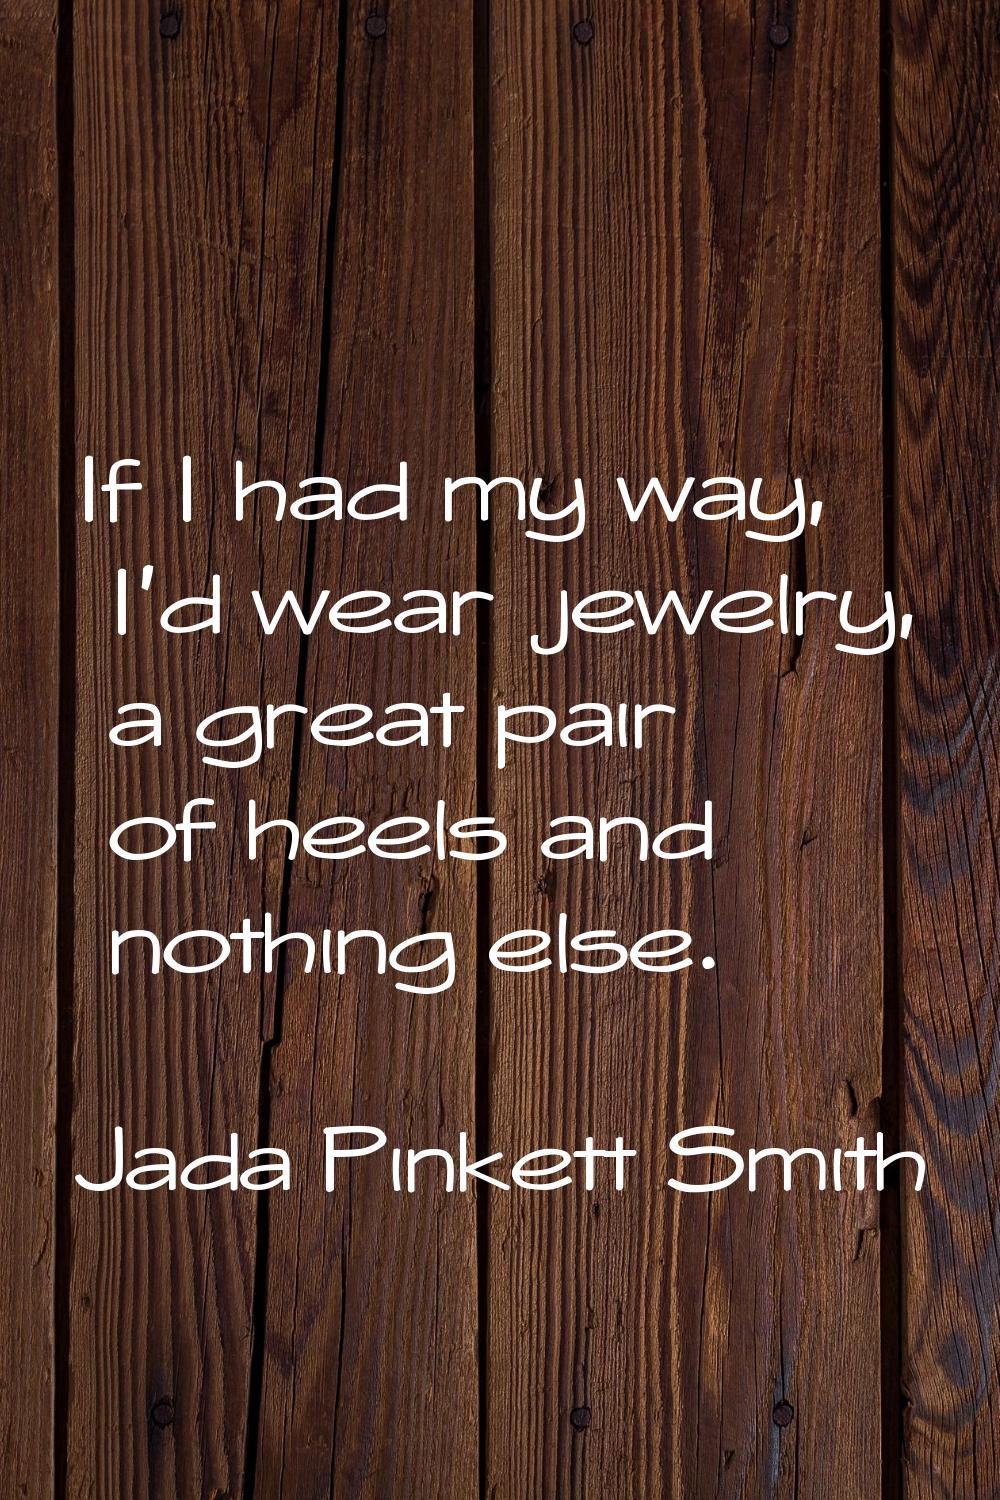 If I had my way, I'd wear jewelry, a great pair of heels and nothing else.